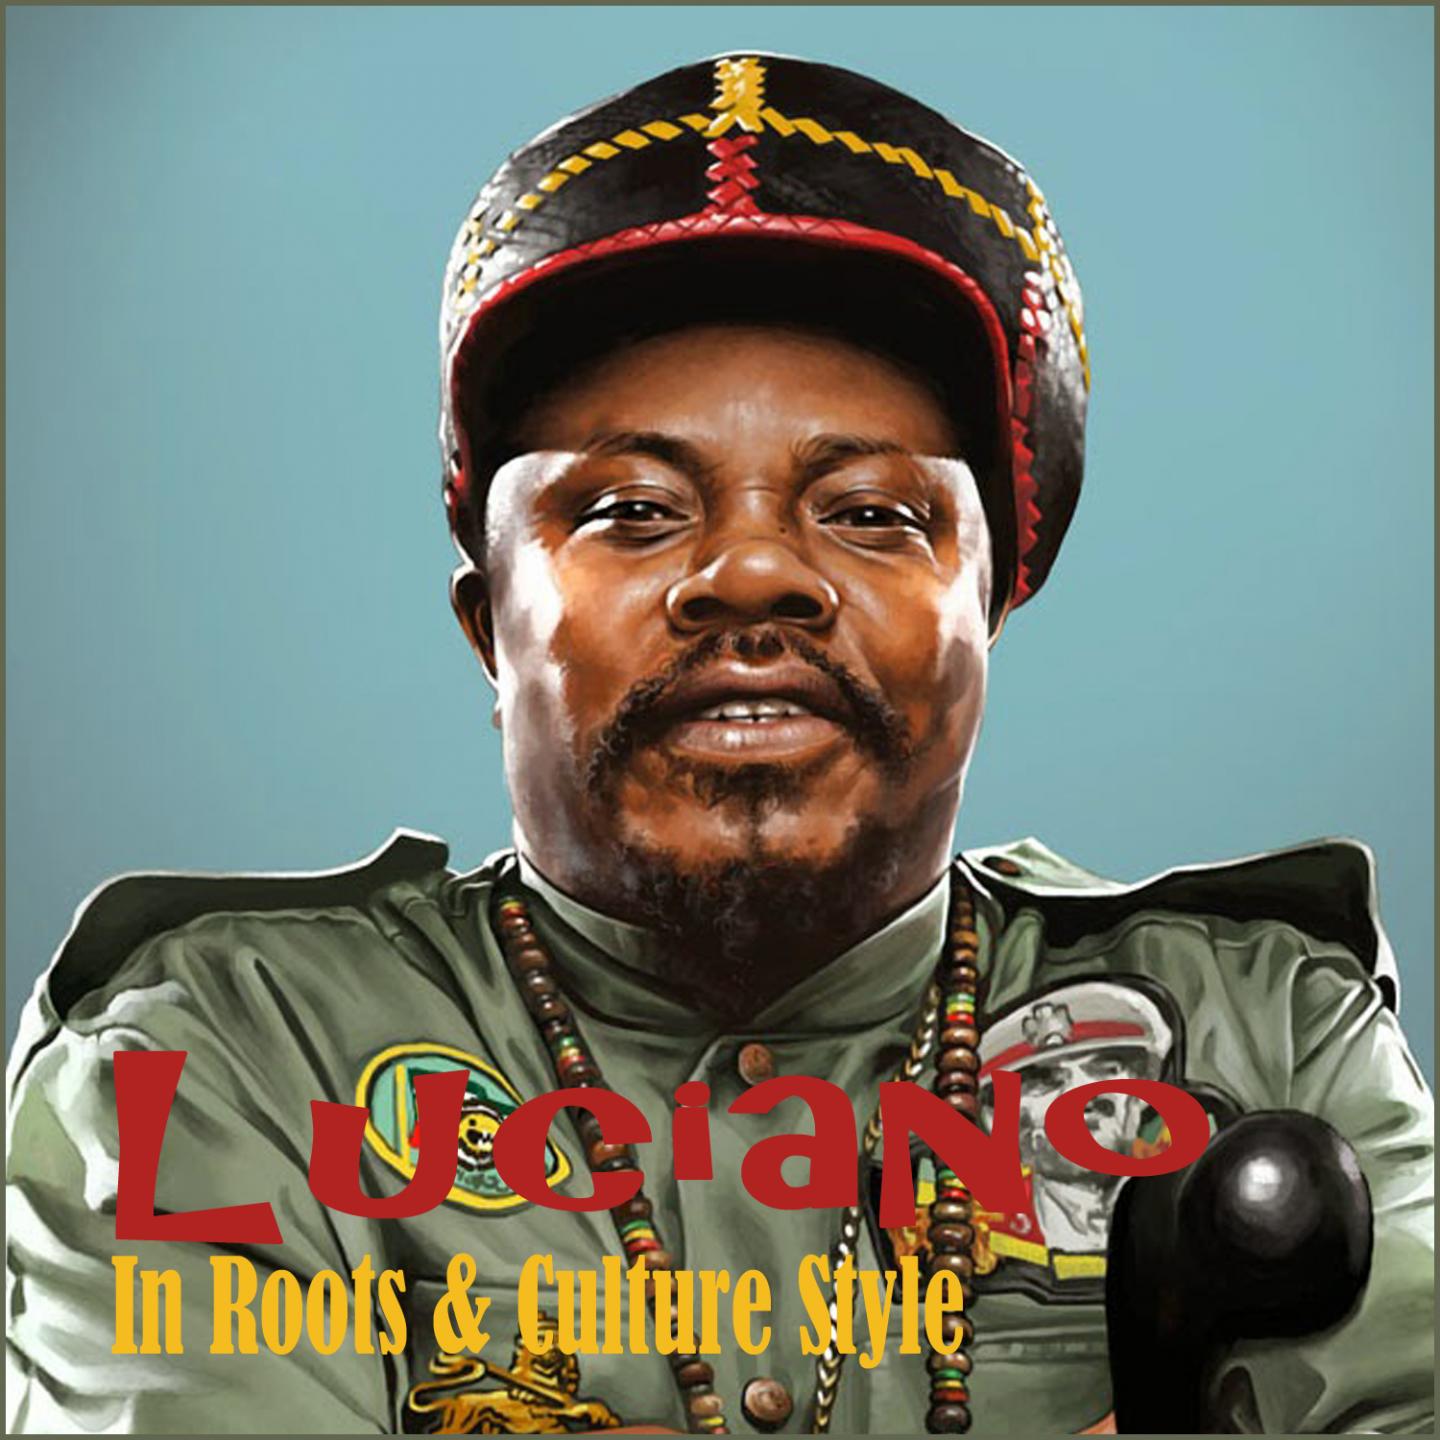 Luciano : In Roots & Culture Style